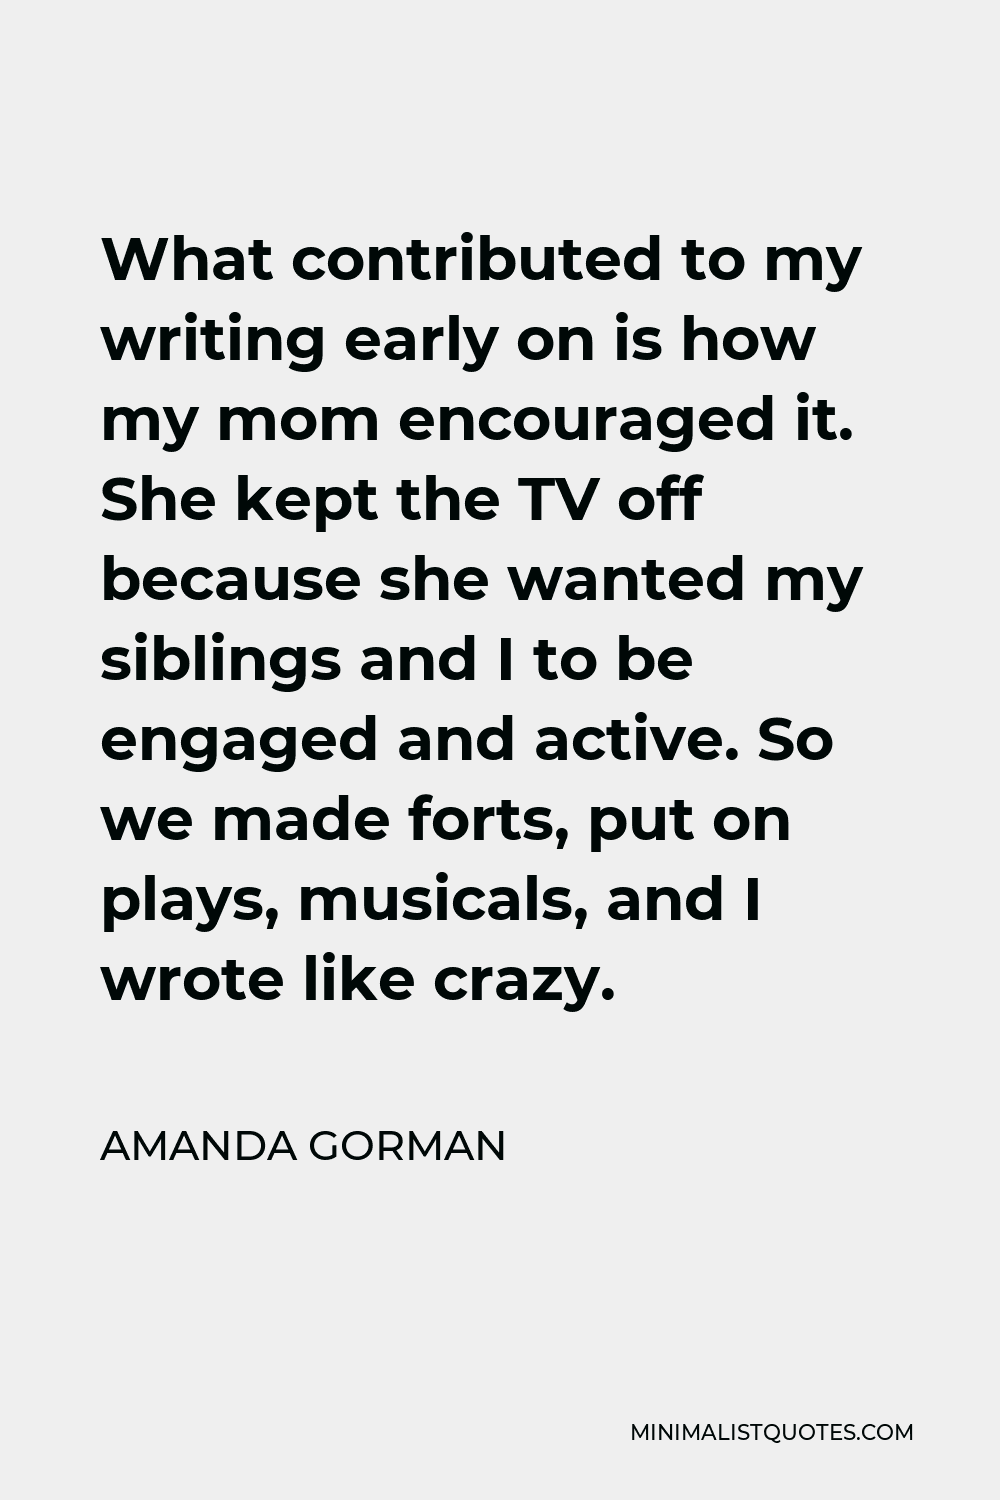 Amanda Gorman Quote - What contributed to my writing early on is how my mom encouraged it. She kept the TV off because she wanted my siblings and I to be engaged and active. So we made forts, put on plays, musicals, and I wrote like crazy.